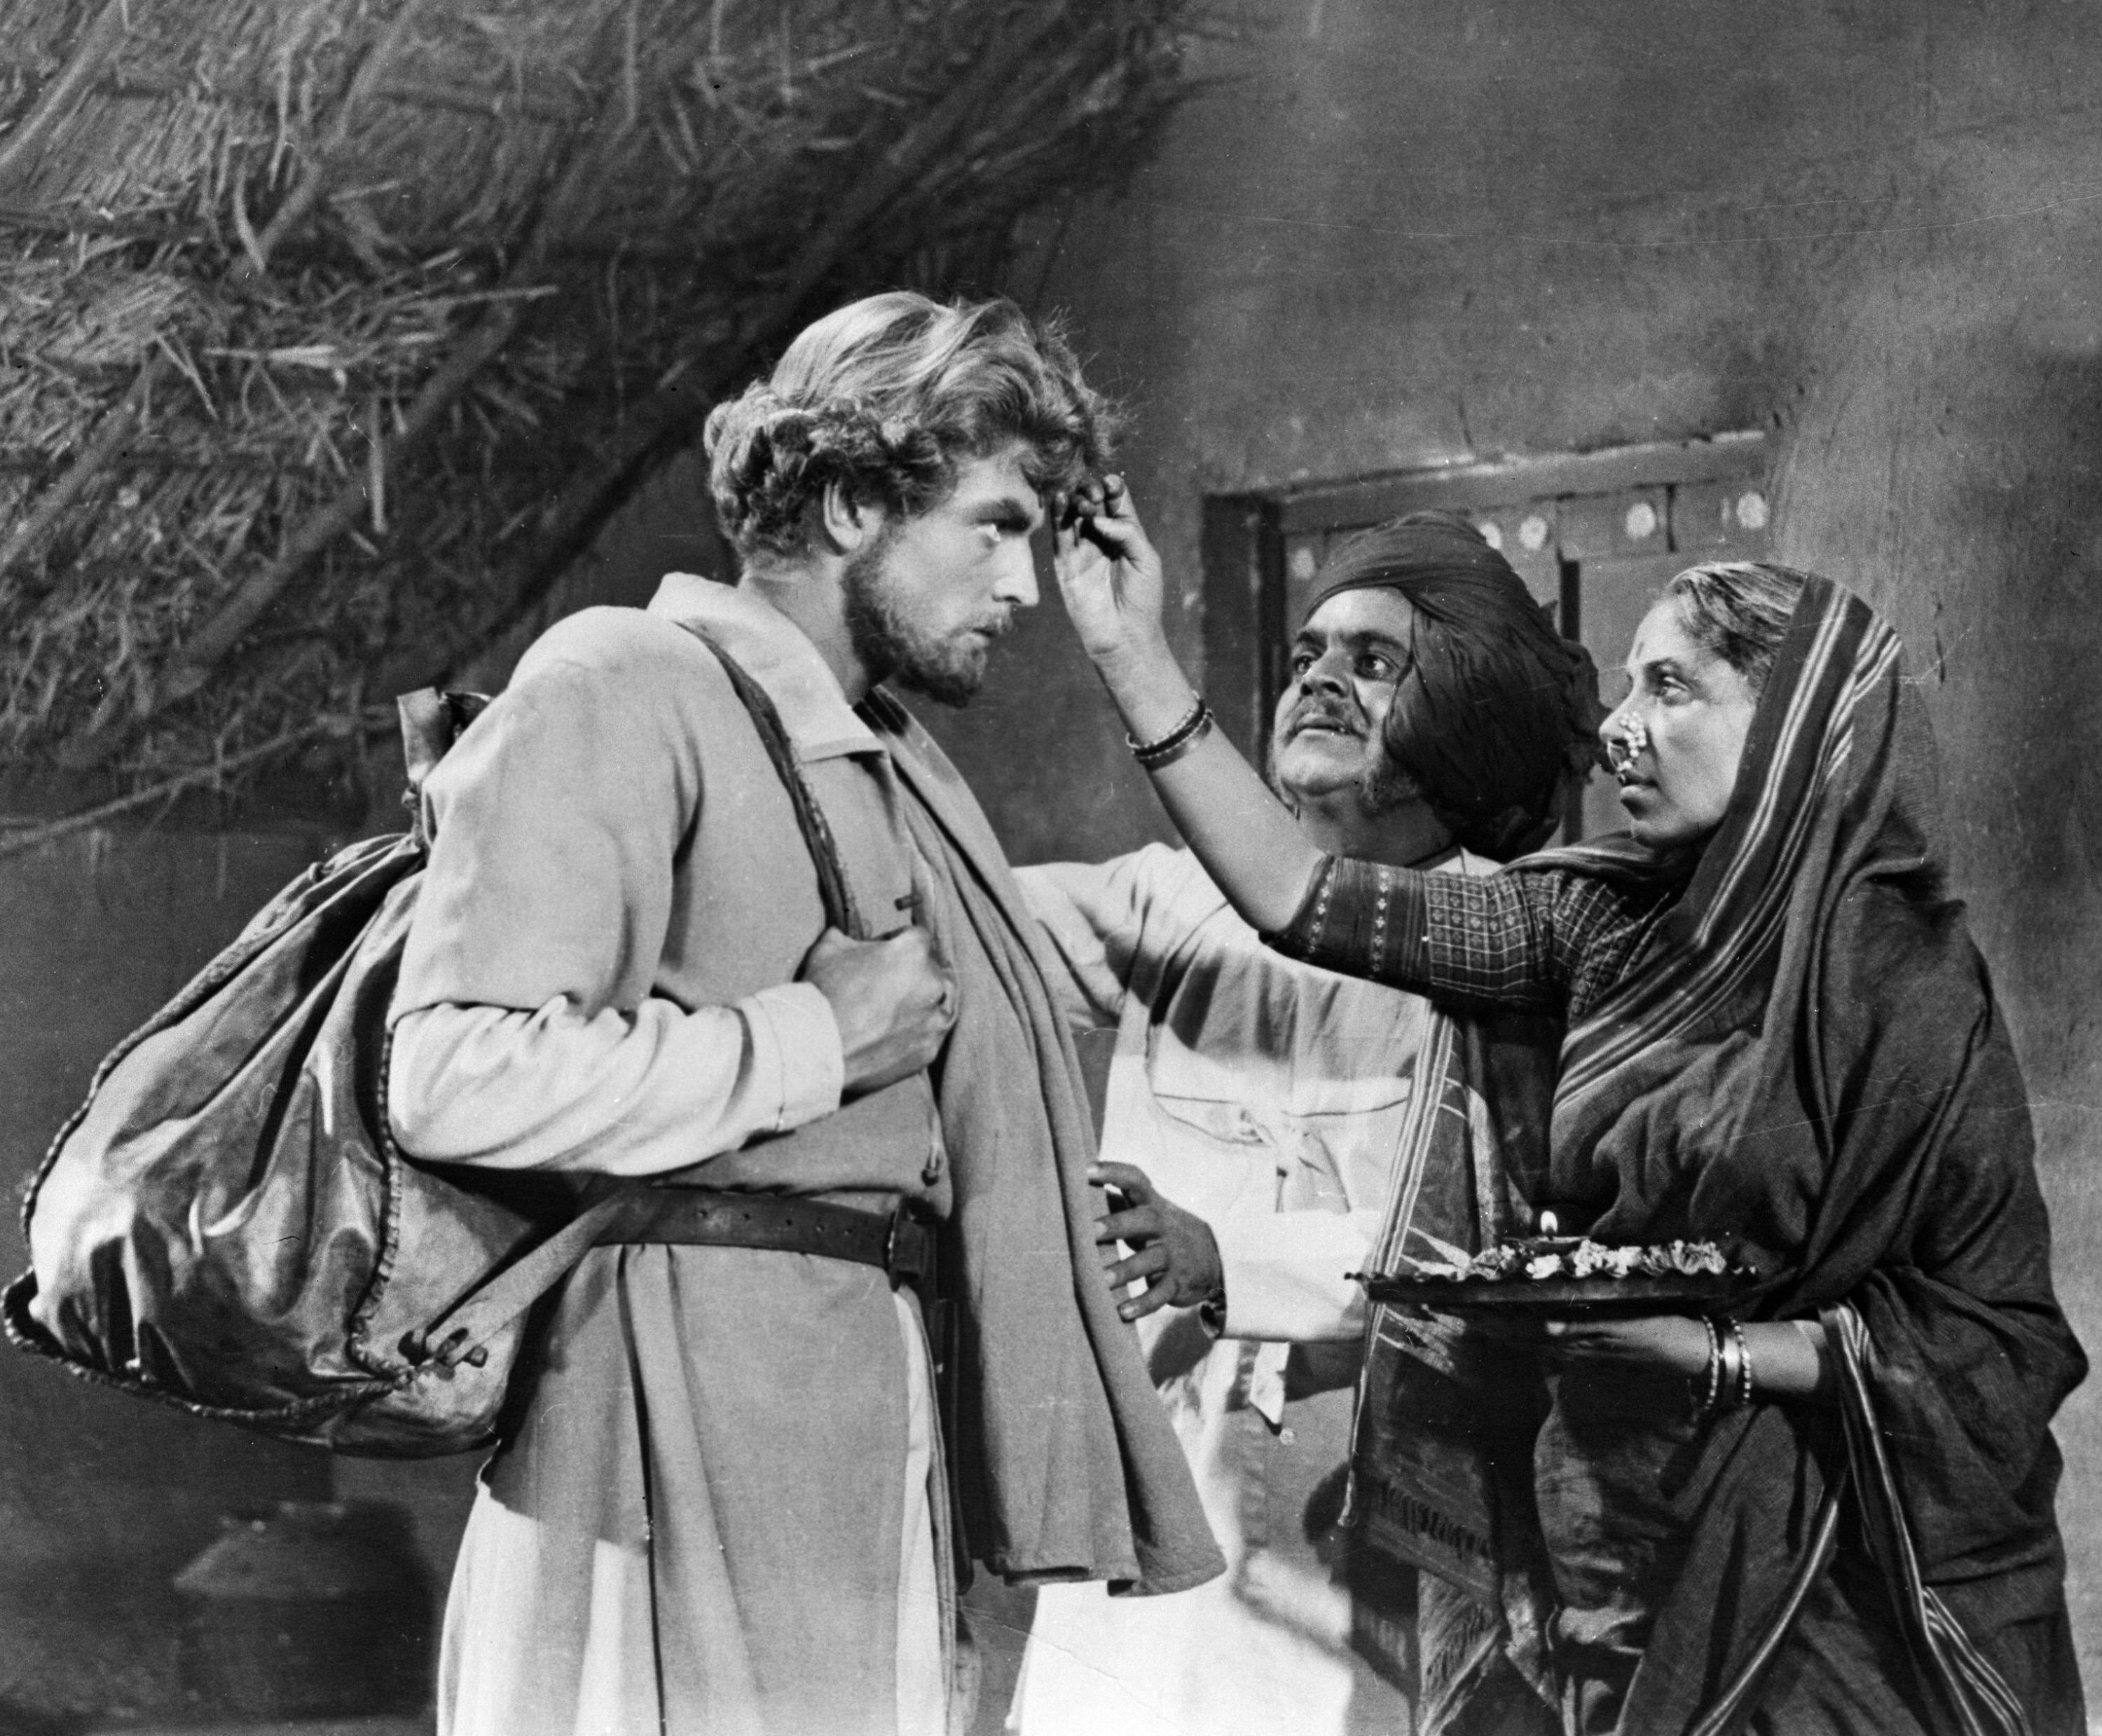 Soviet actor Oleg Strizhenov as Afanasiy Nikitin (left) and Indian actors at the shooting of the first Soviet-Indian movie "Over Three Seas".